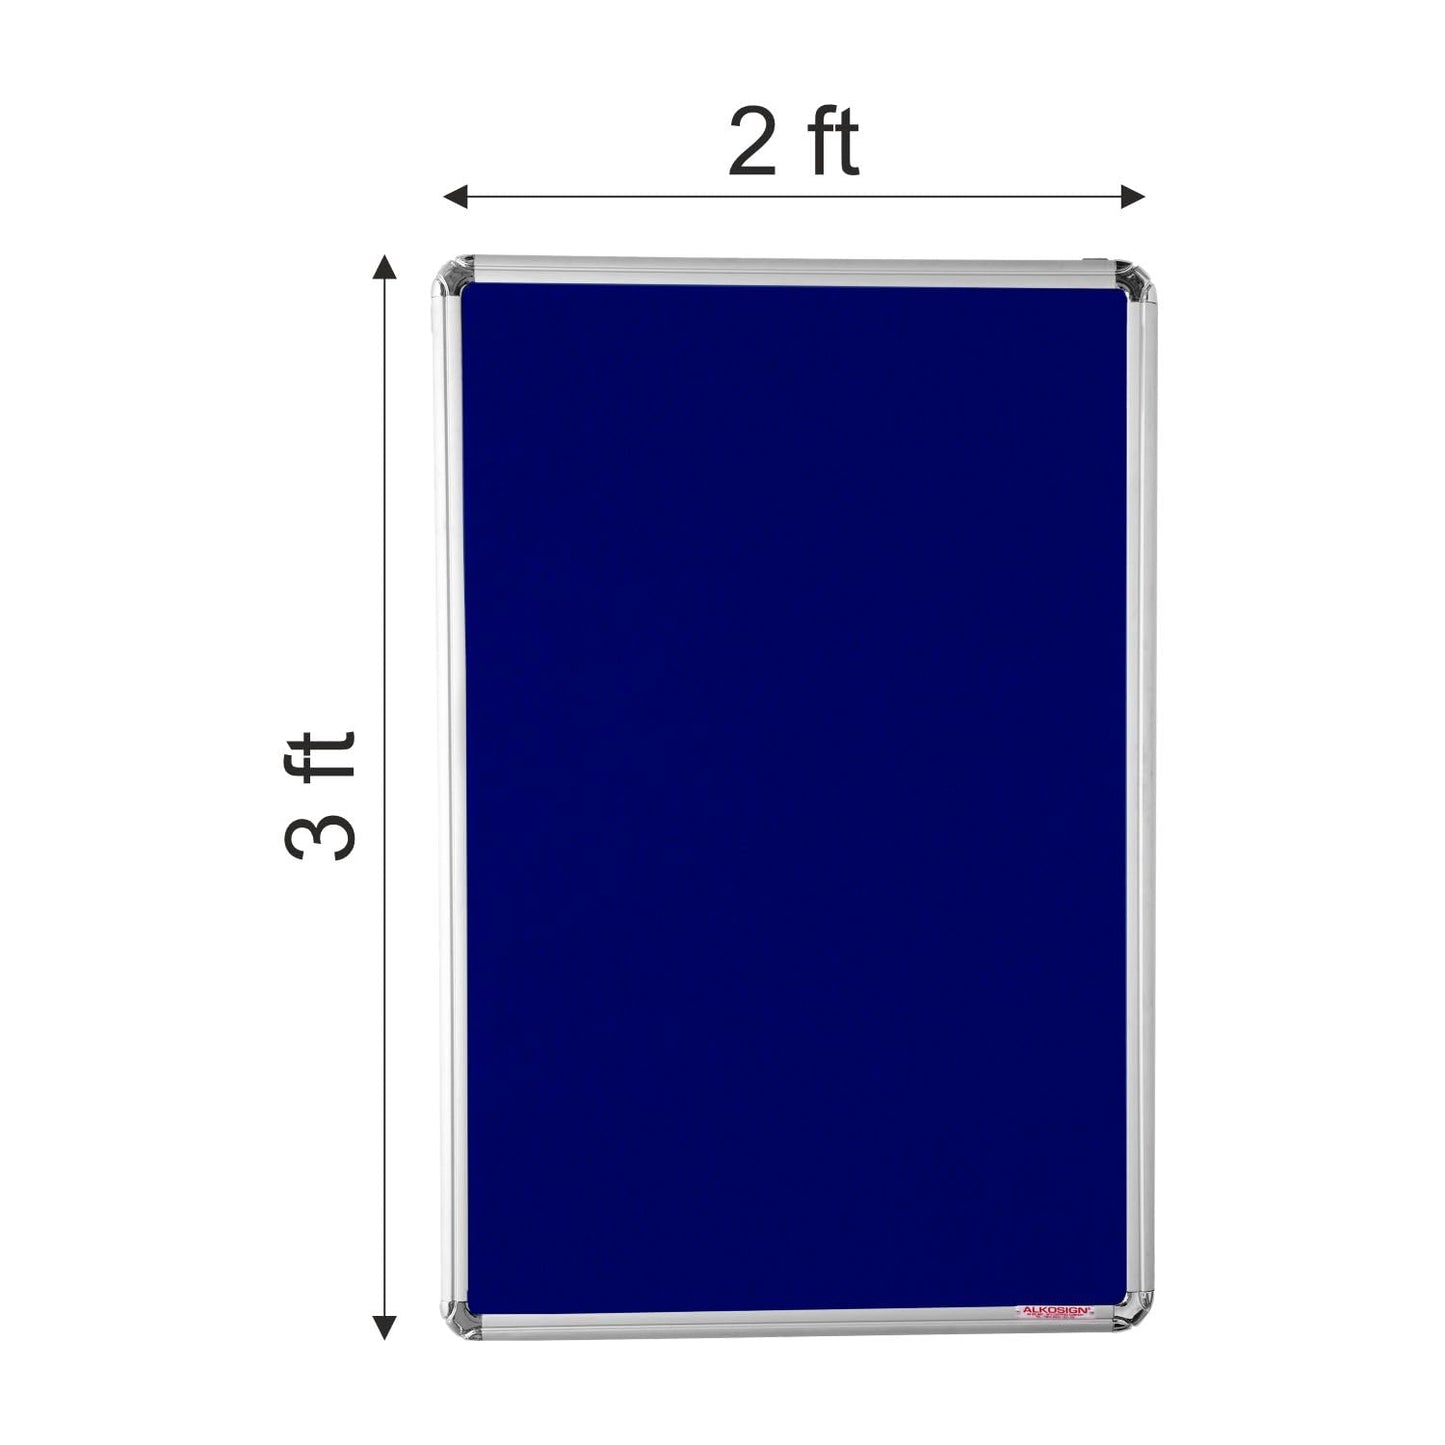 Digismart Noticeboard Classic Channel (Blue) for Office, Home & School Aluminum (Pack of 1) (Non Magnetic)